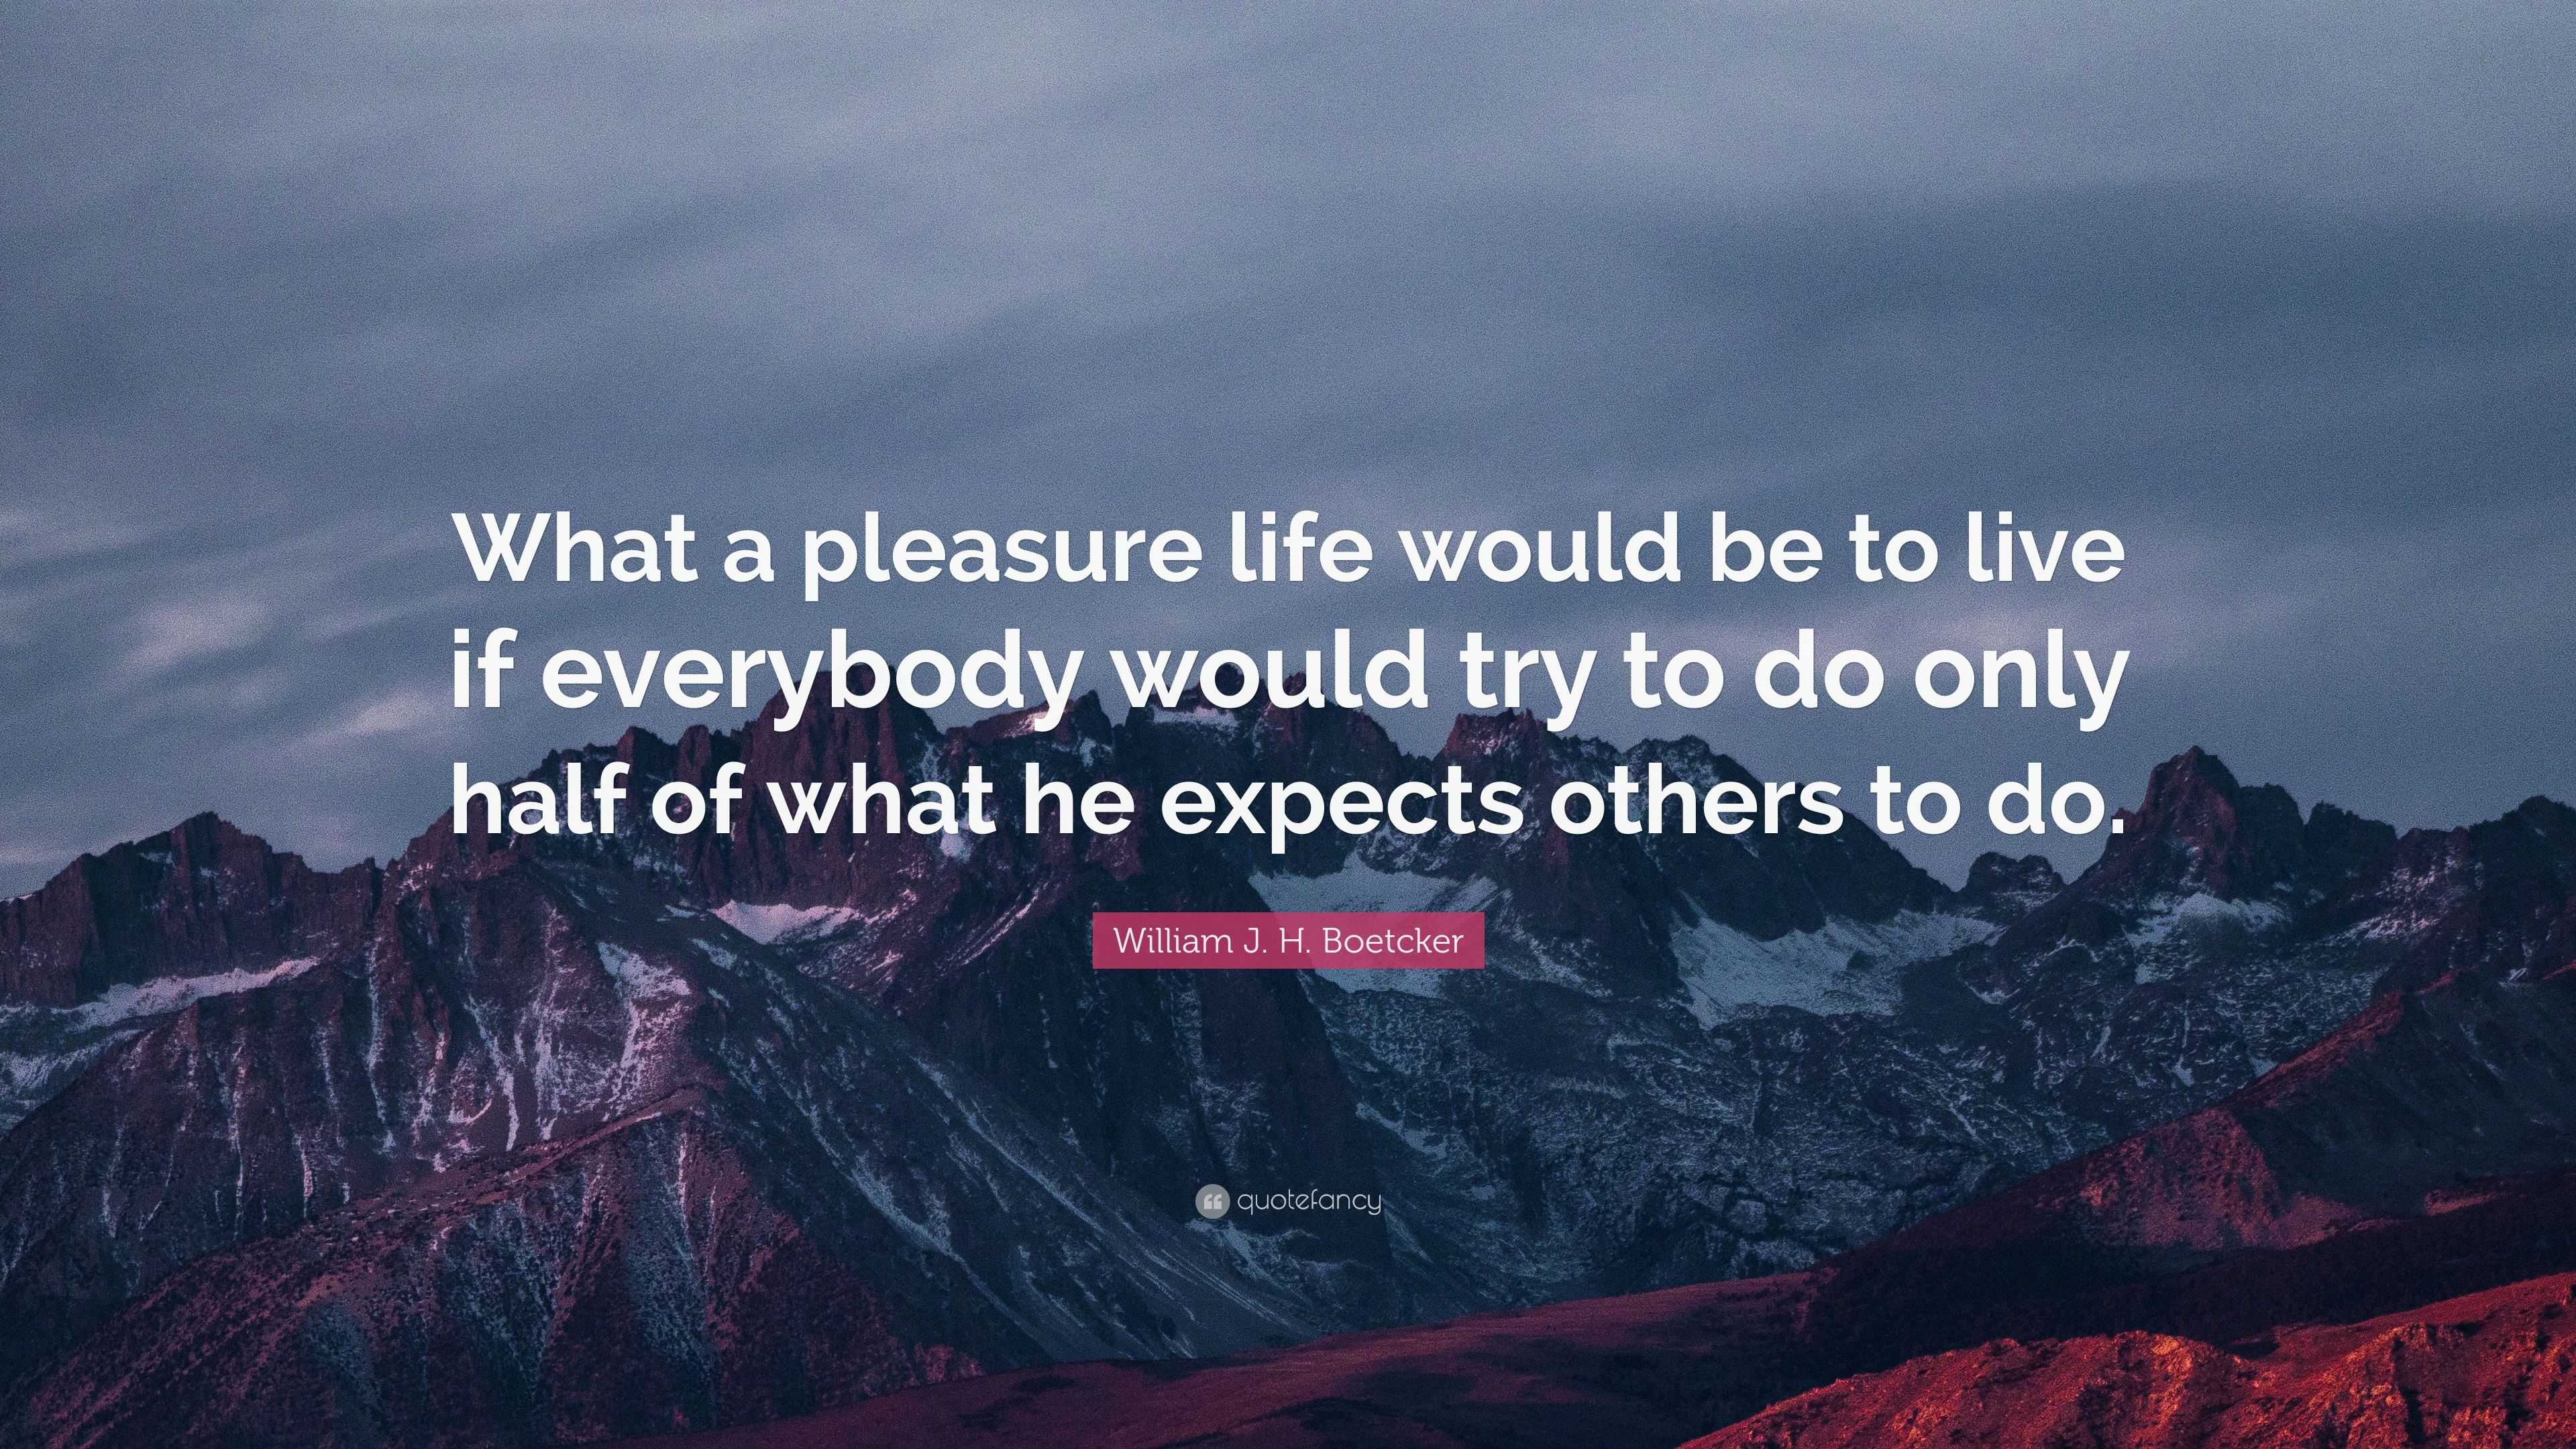 William J. H. Boetcker Quote: “What a pleasure life would be to live if ...